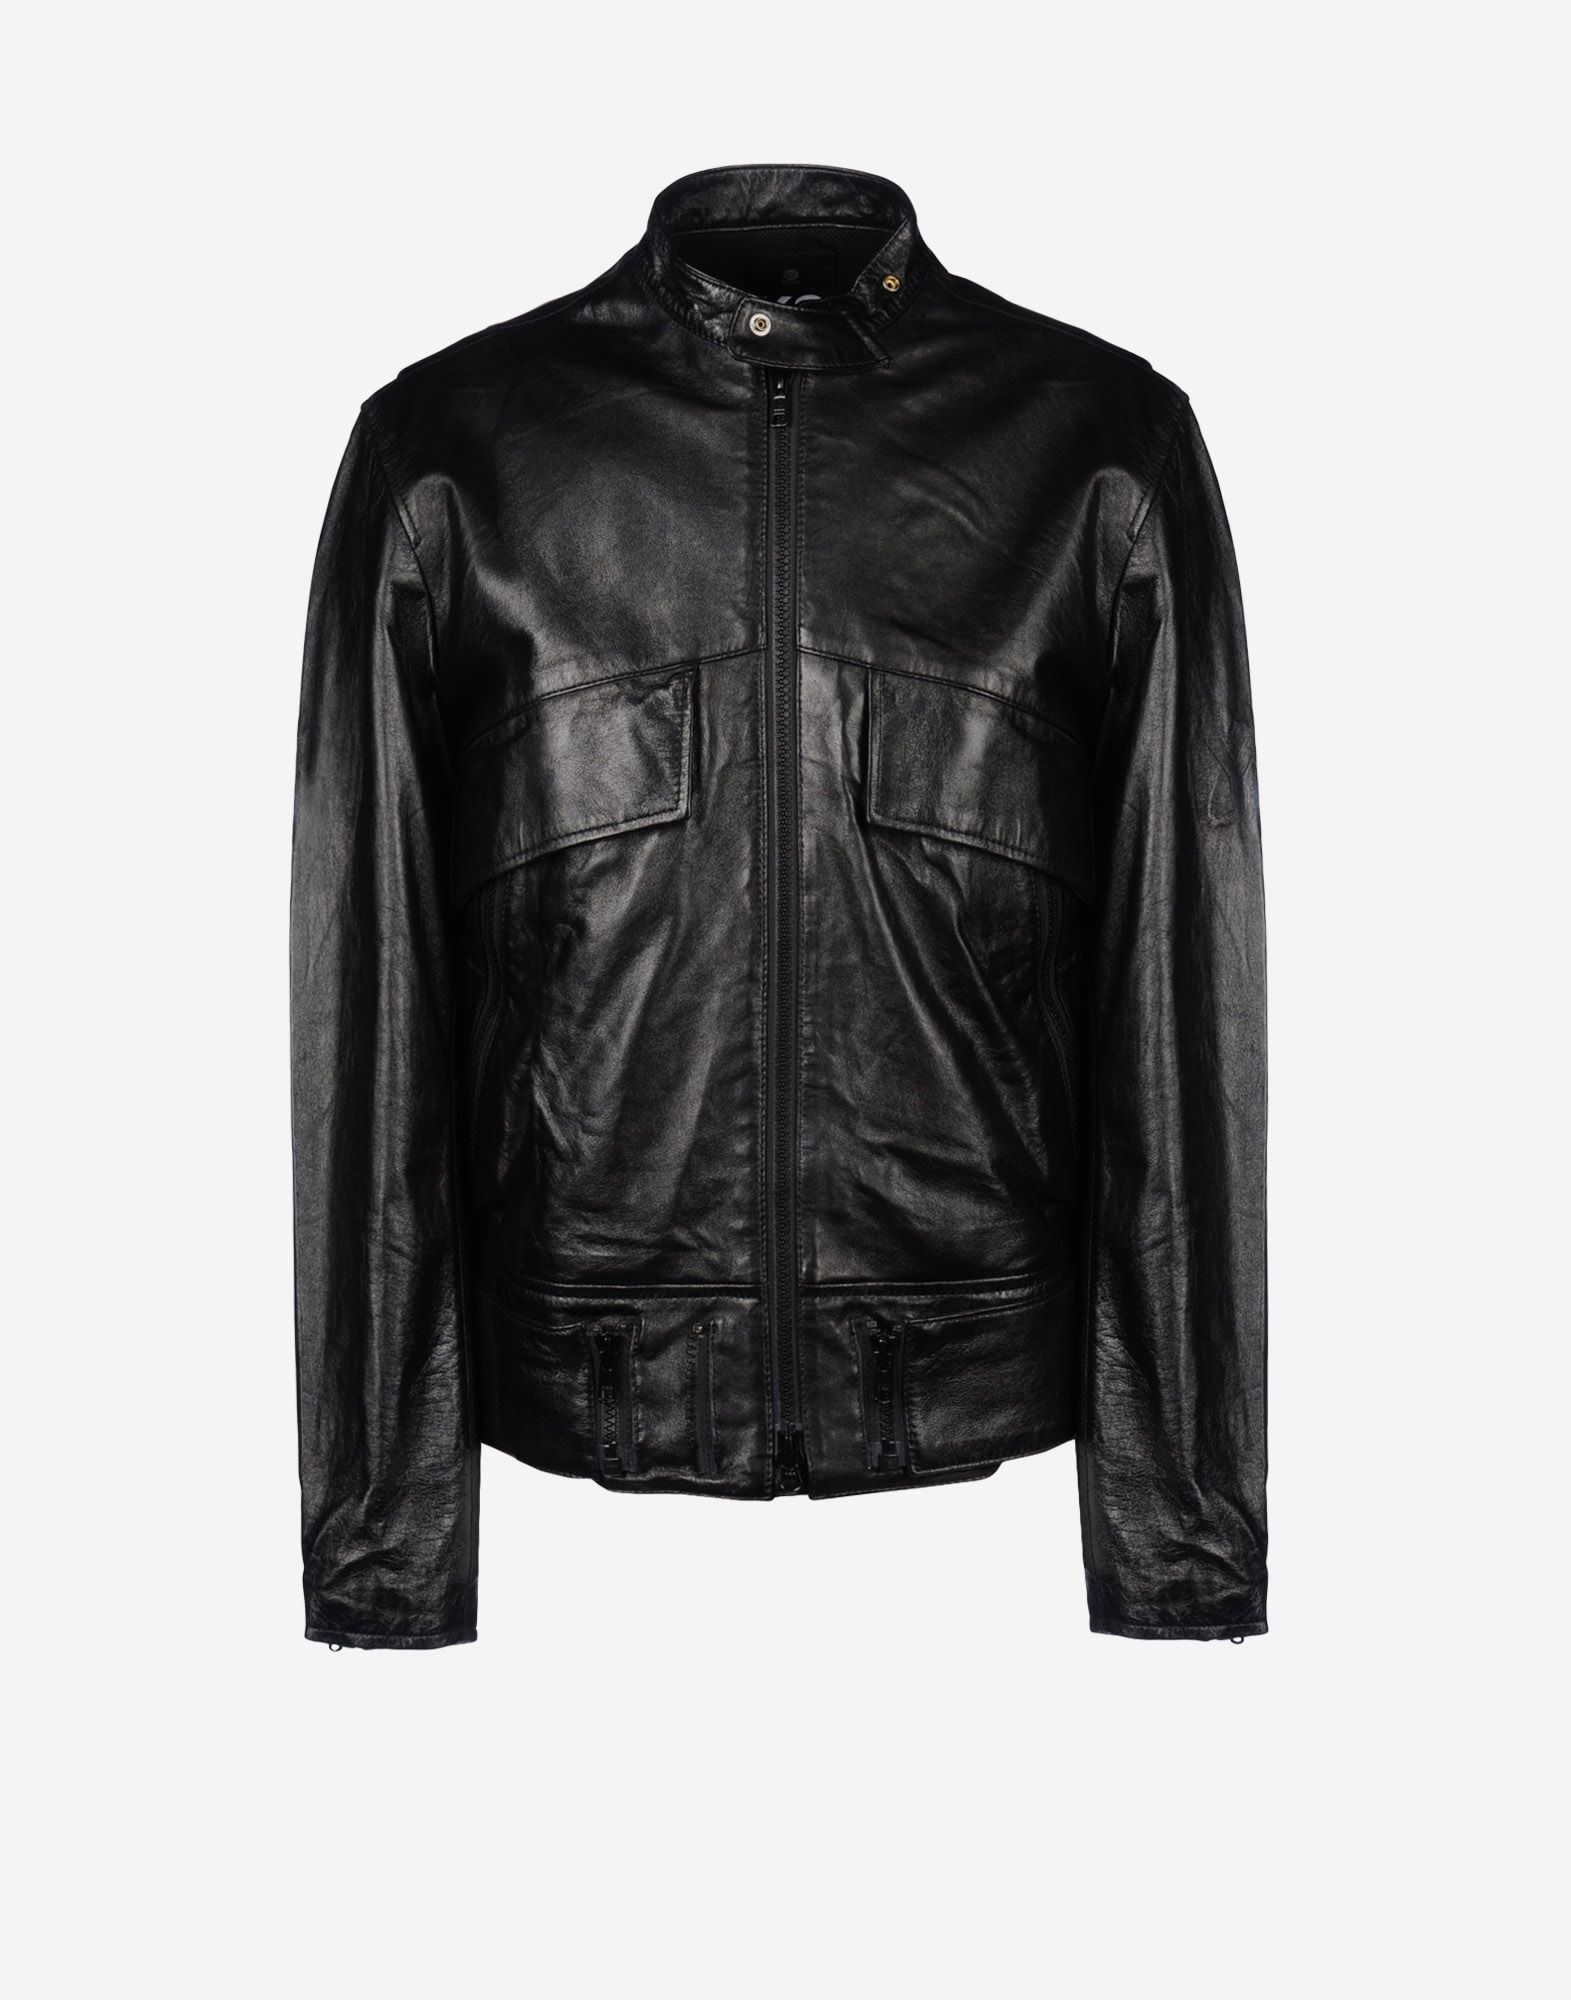 Y 3 Leather Jacket for Men | Adidas Y-3 Official Store